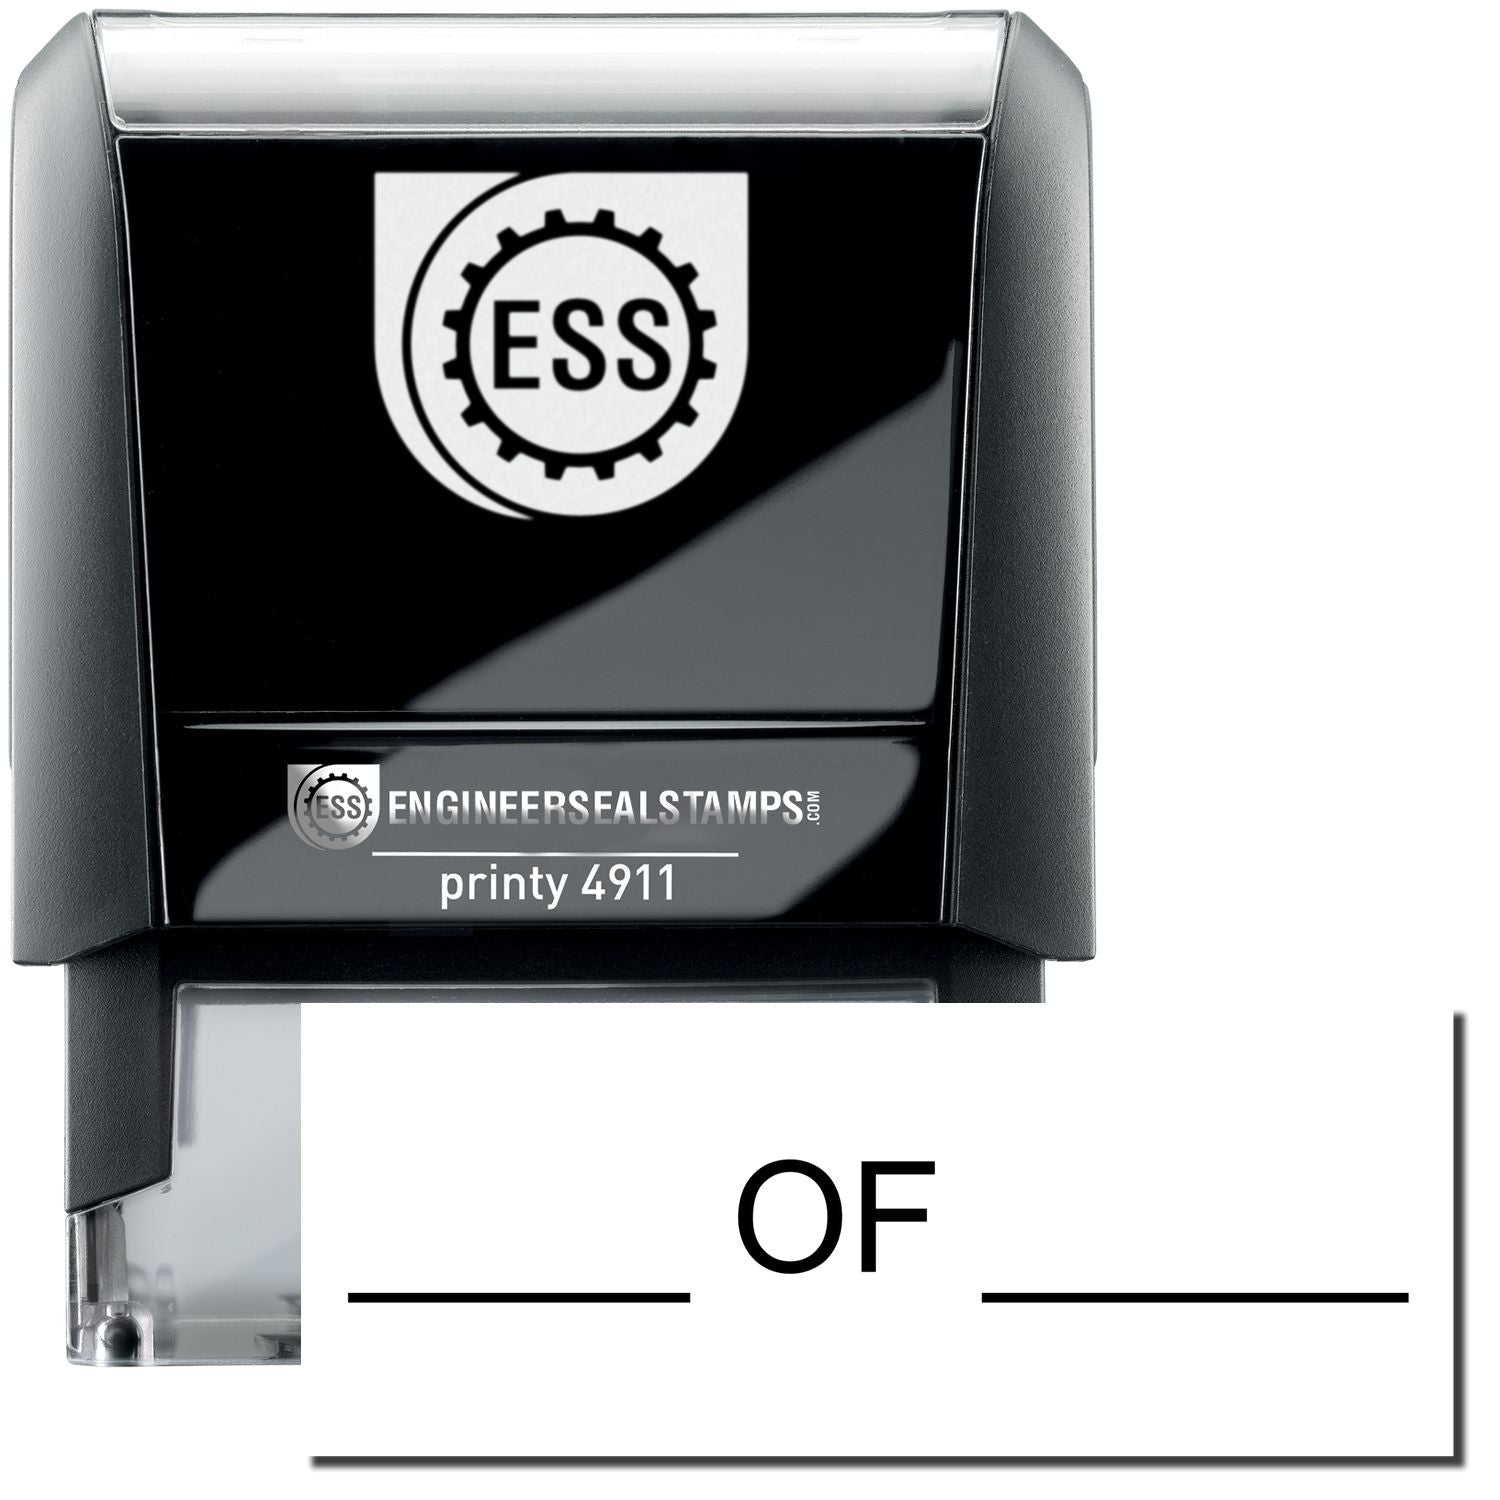 A self-inking stamp with a stamped image showing how the text "____ OF ____" is displayed after stamping.